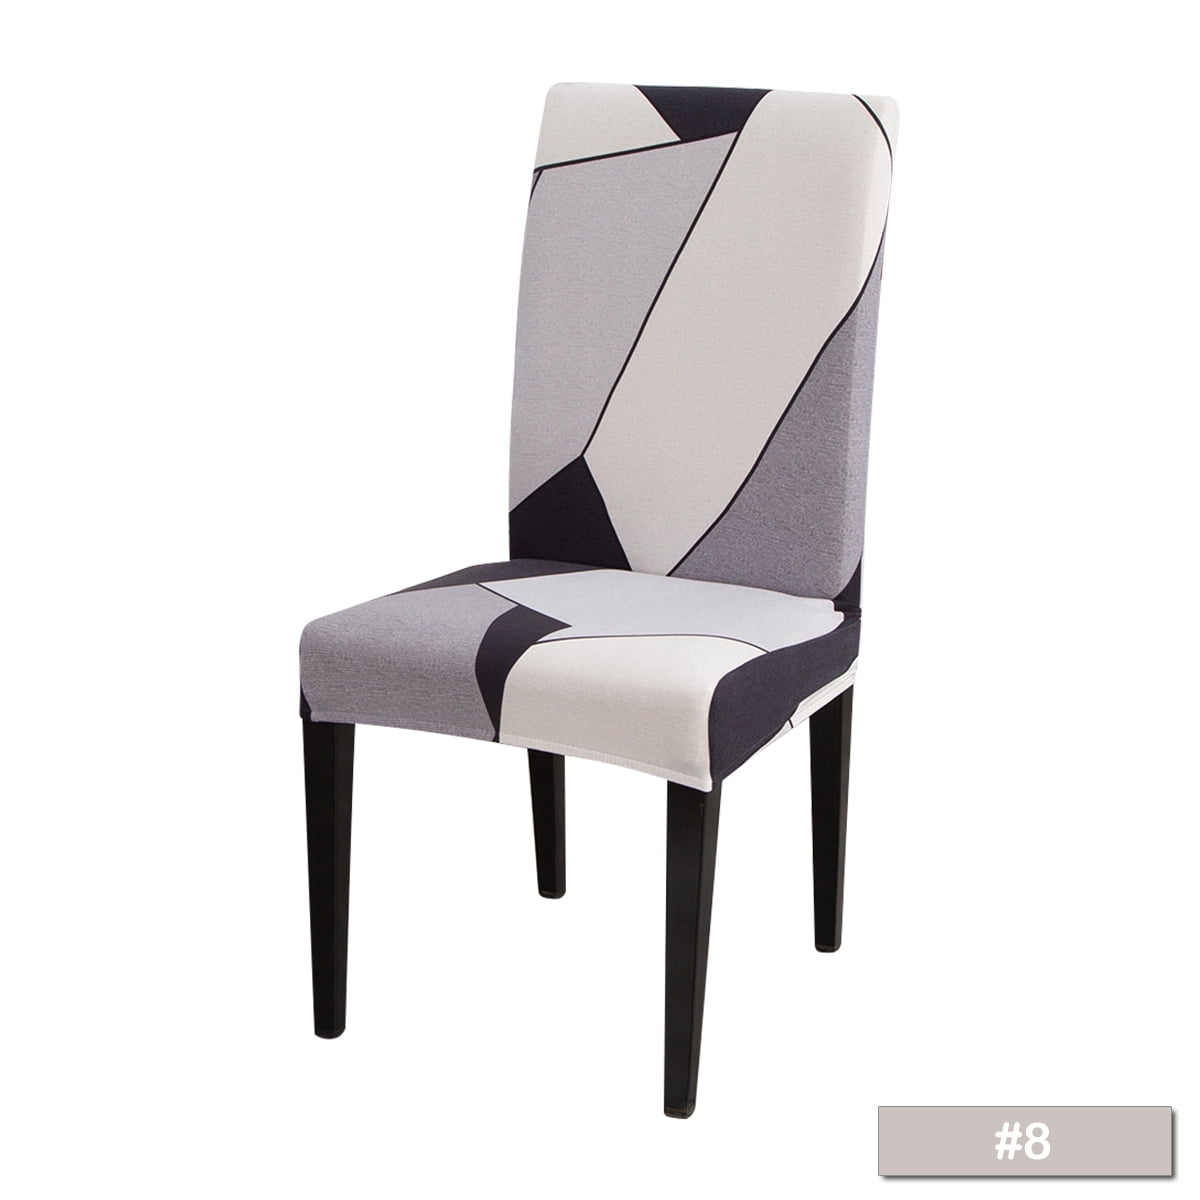 Details about   Geometric Dining Chair Covers Spandex Elastic Chair Slipcover Case Chair Covers 